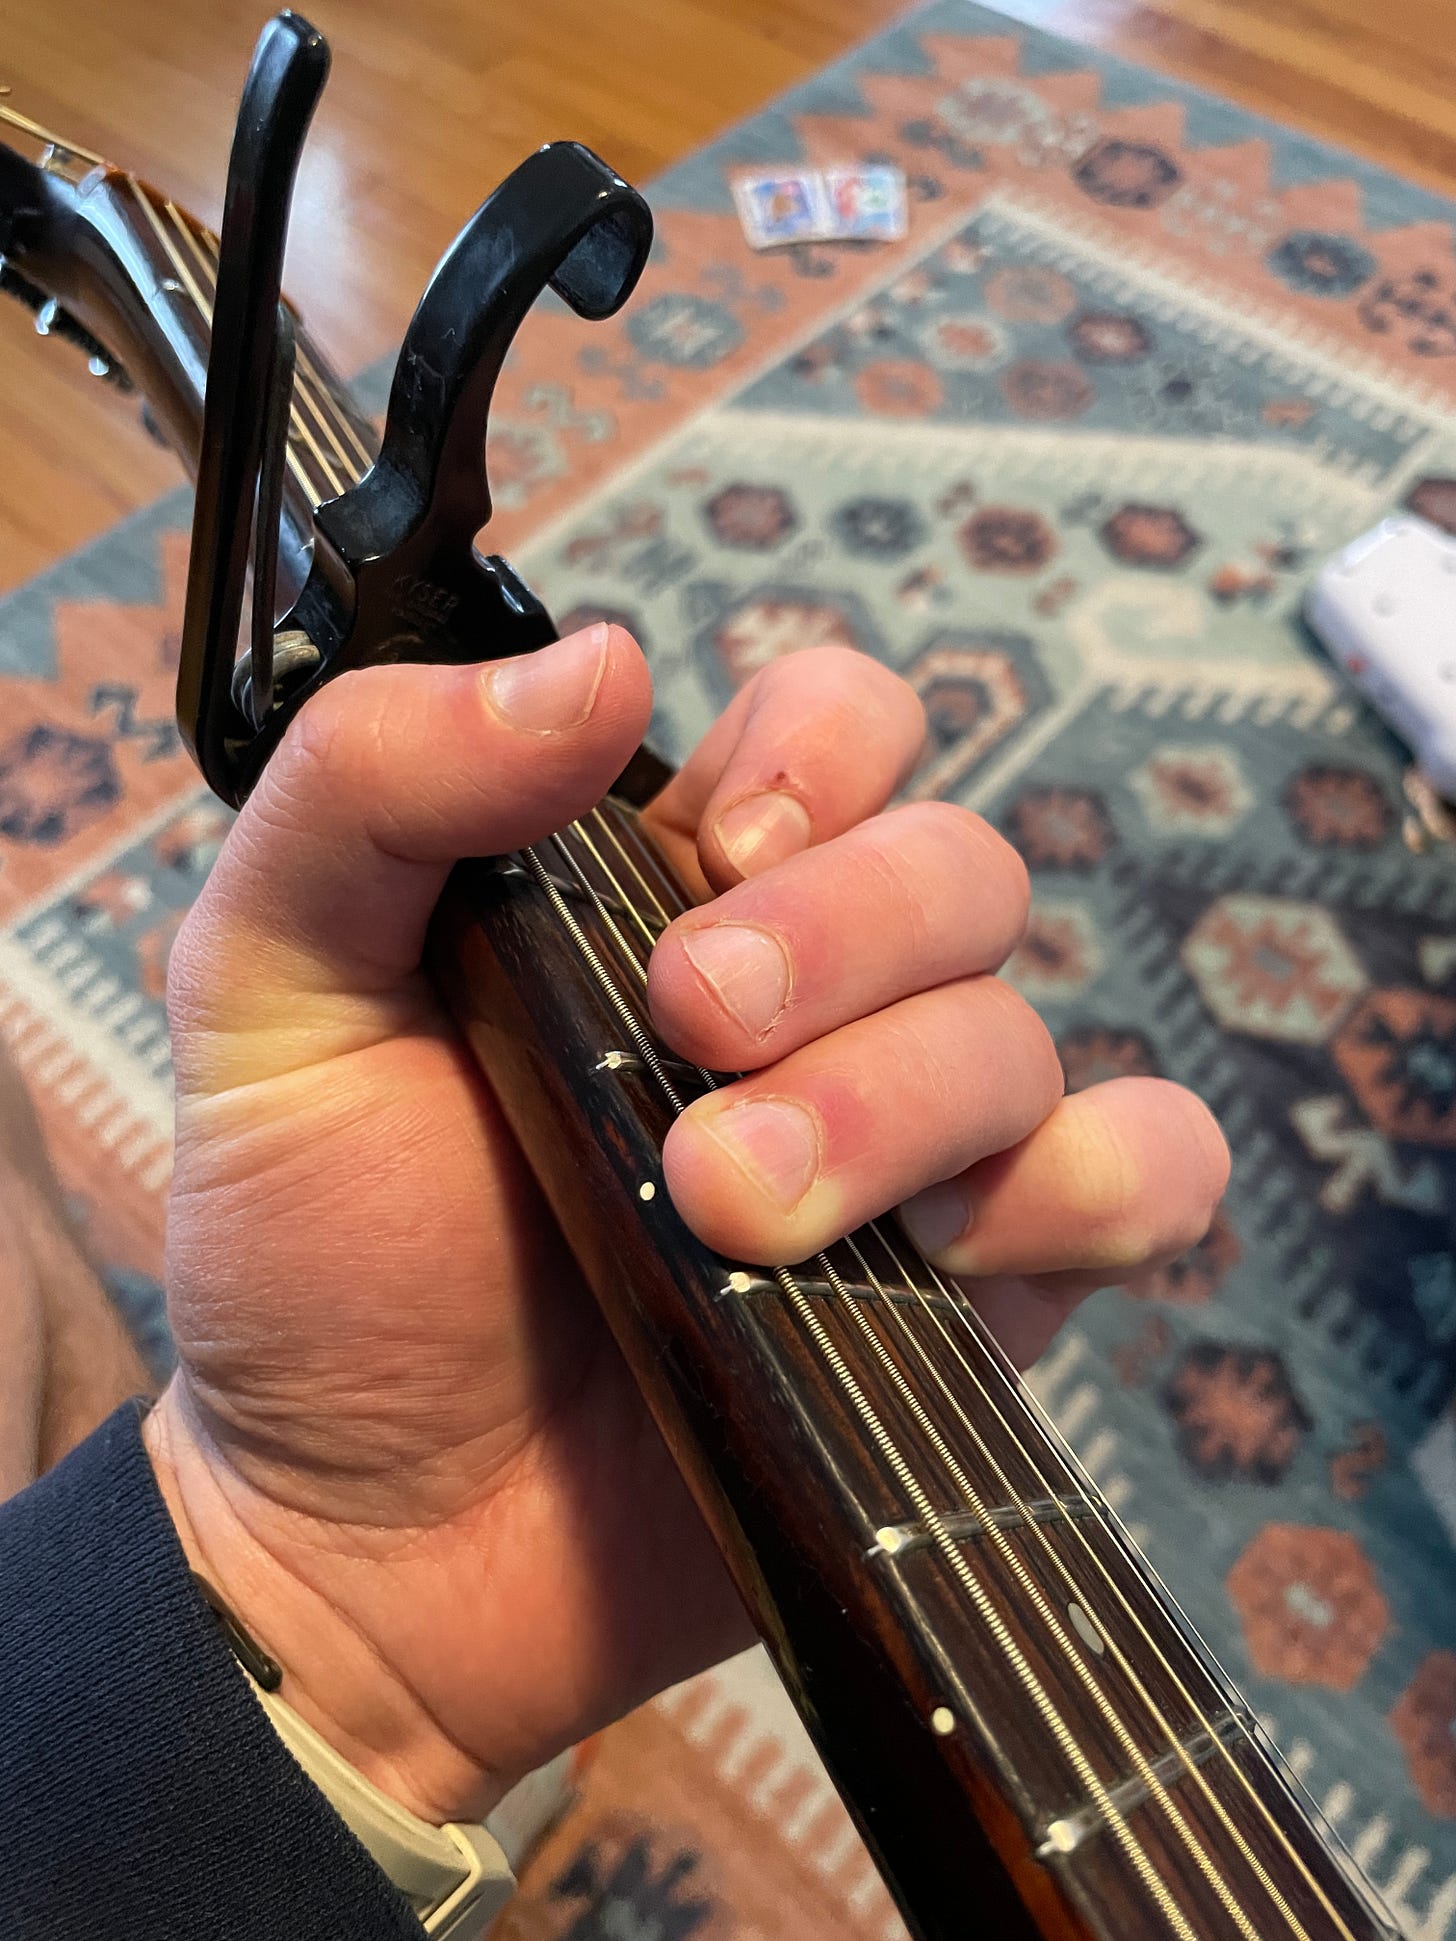 My chunky, callused fingers holding a G major chord. This is what you have to
look forward to kids.